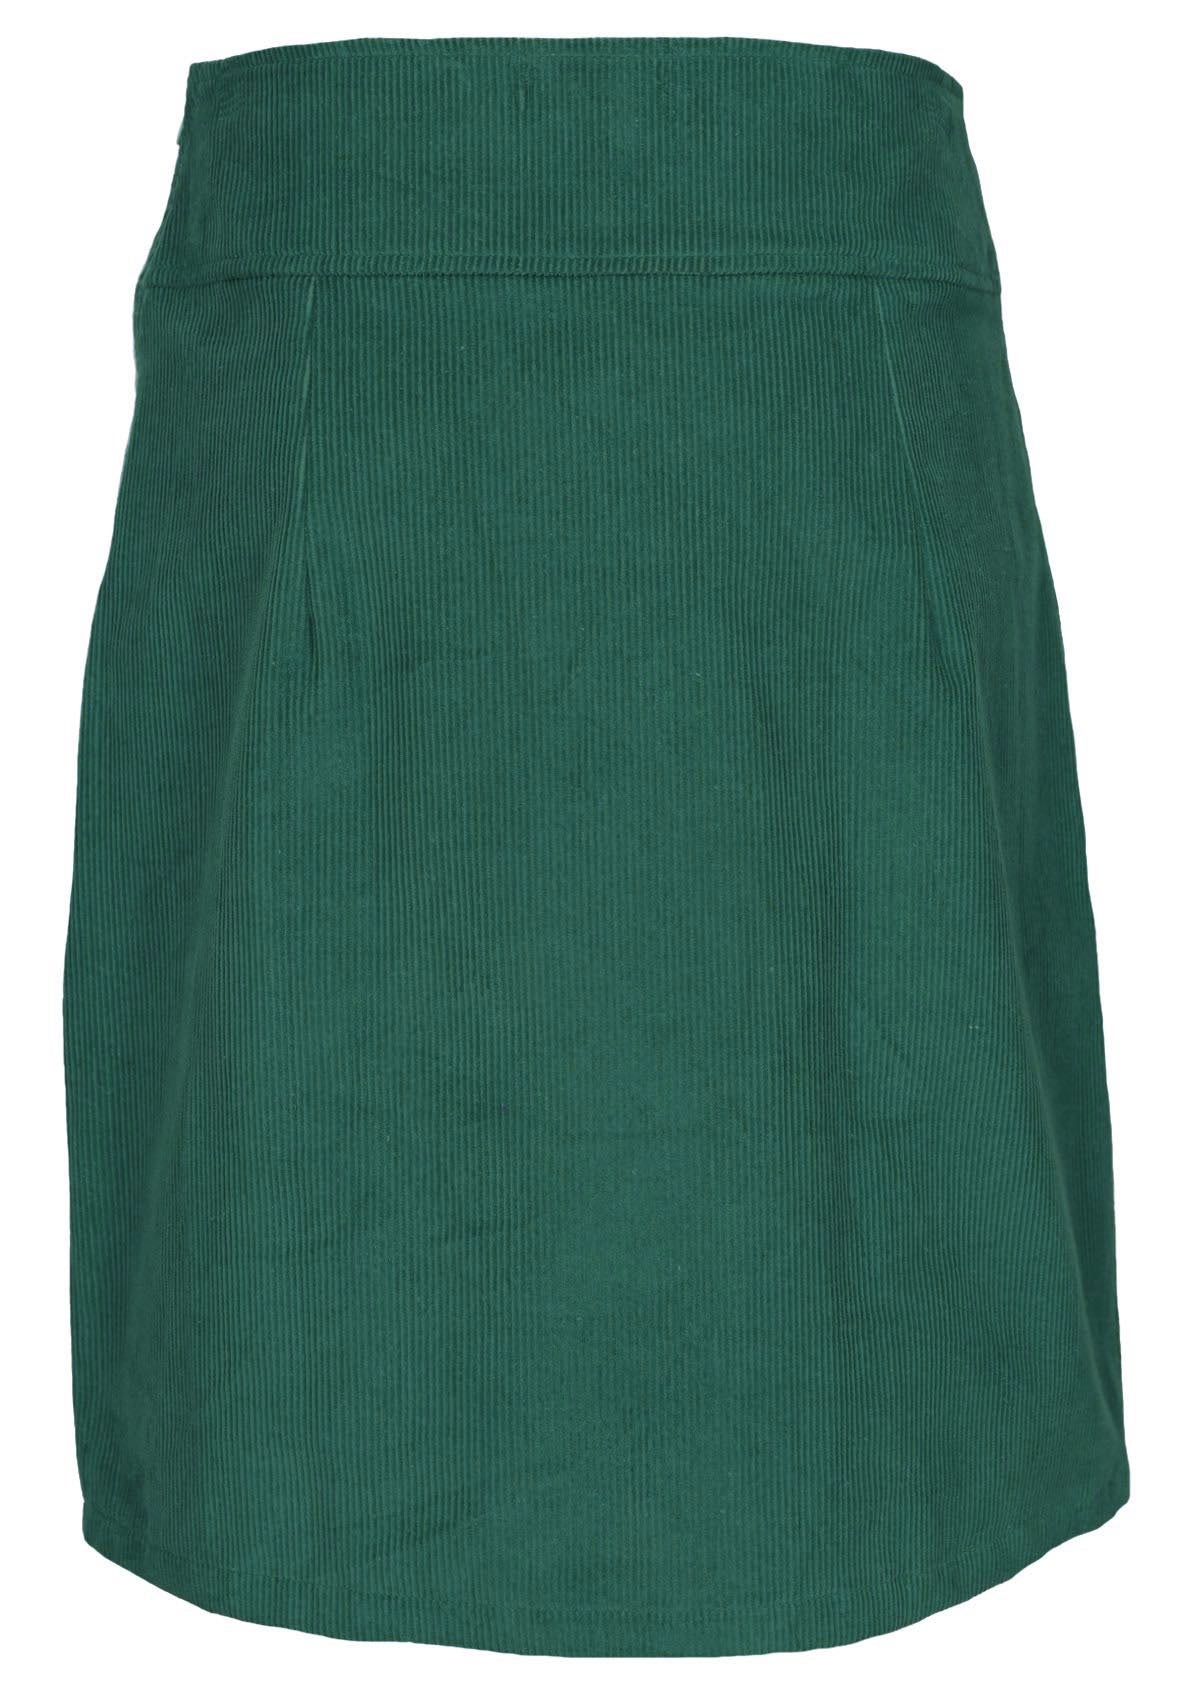 Green skirt made out of 100% cotton corduroy that can be work on the hips or waist. 